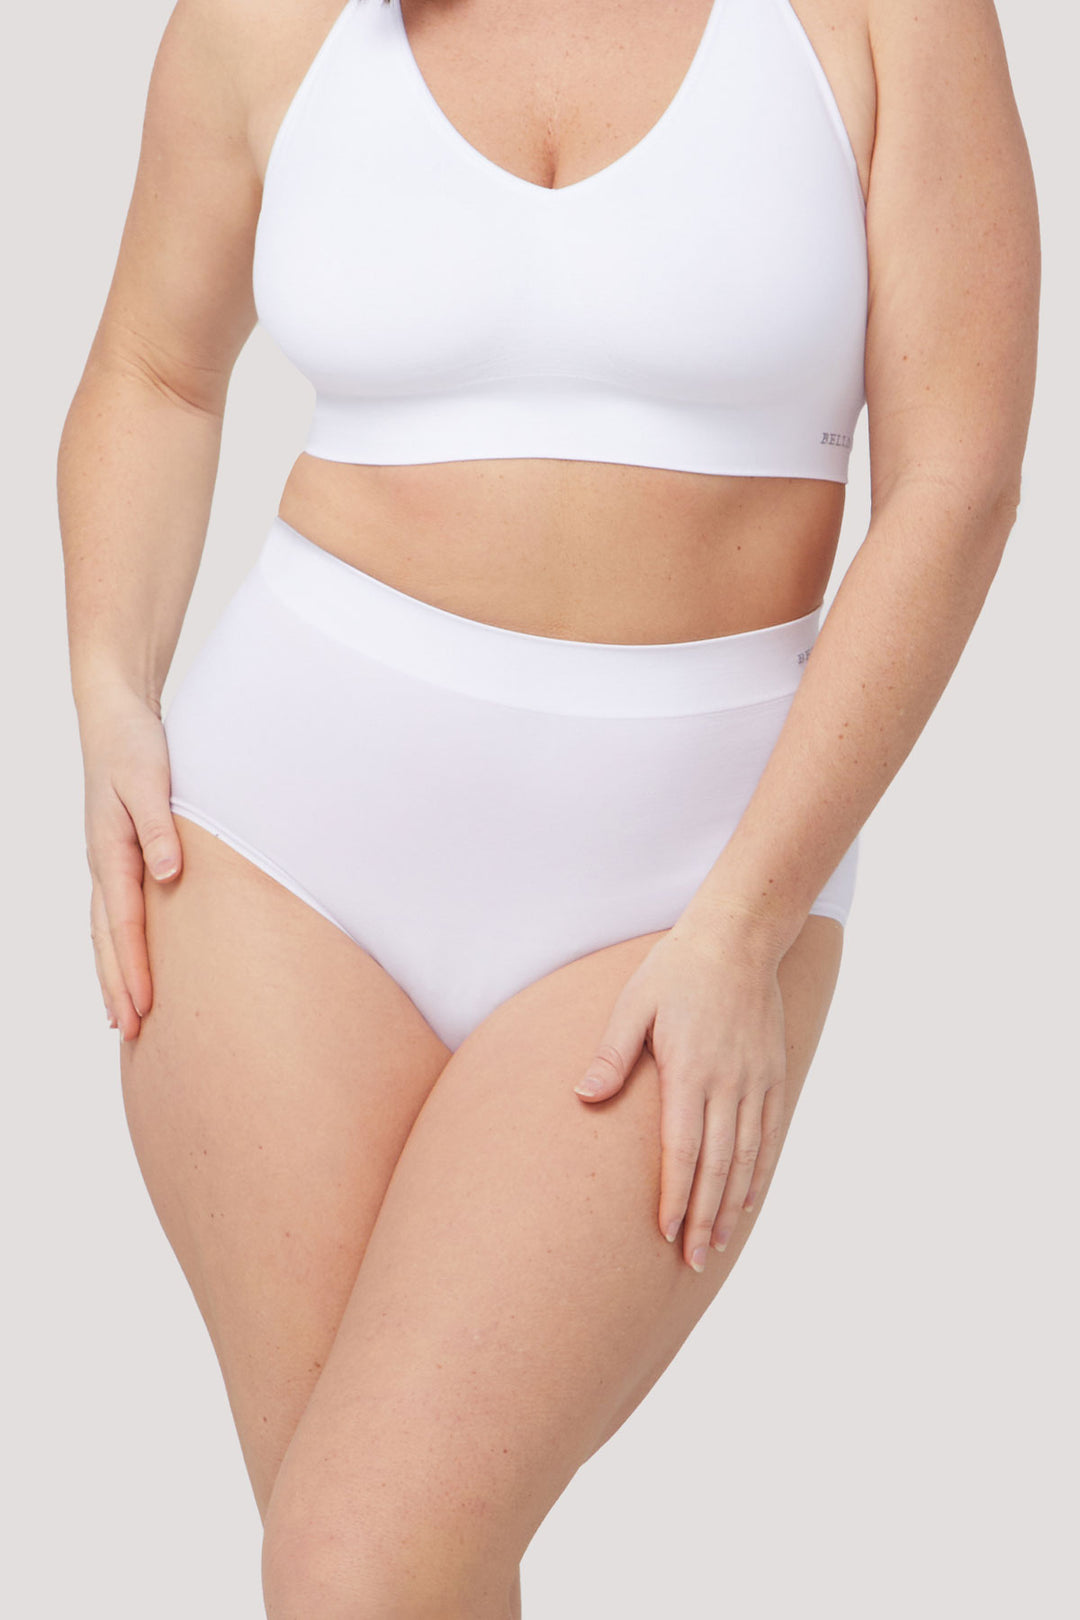 Women's super soft and stretchy, high waist, full coverage underwear 3 pack | Bella Bodies UK | White | Front